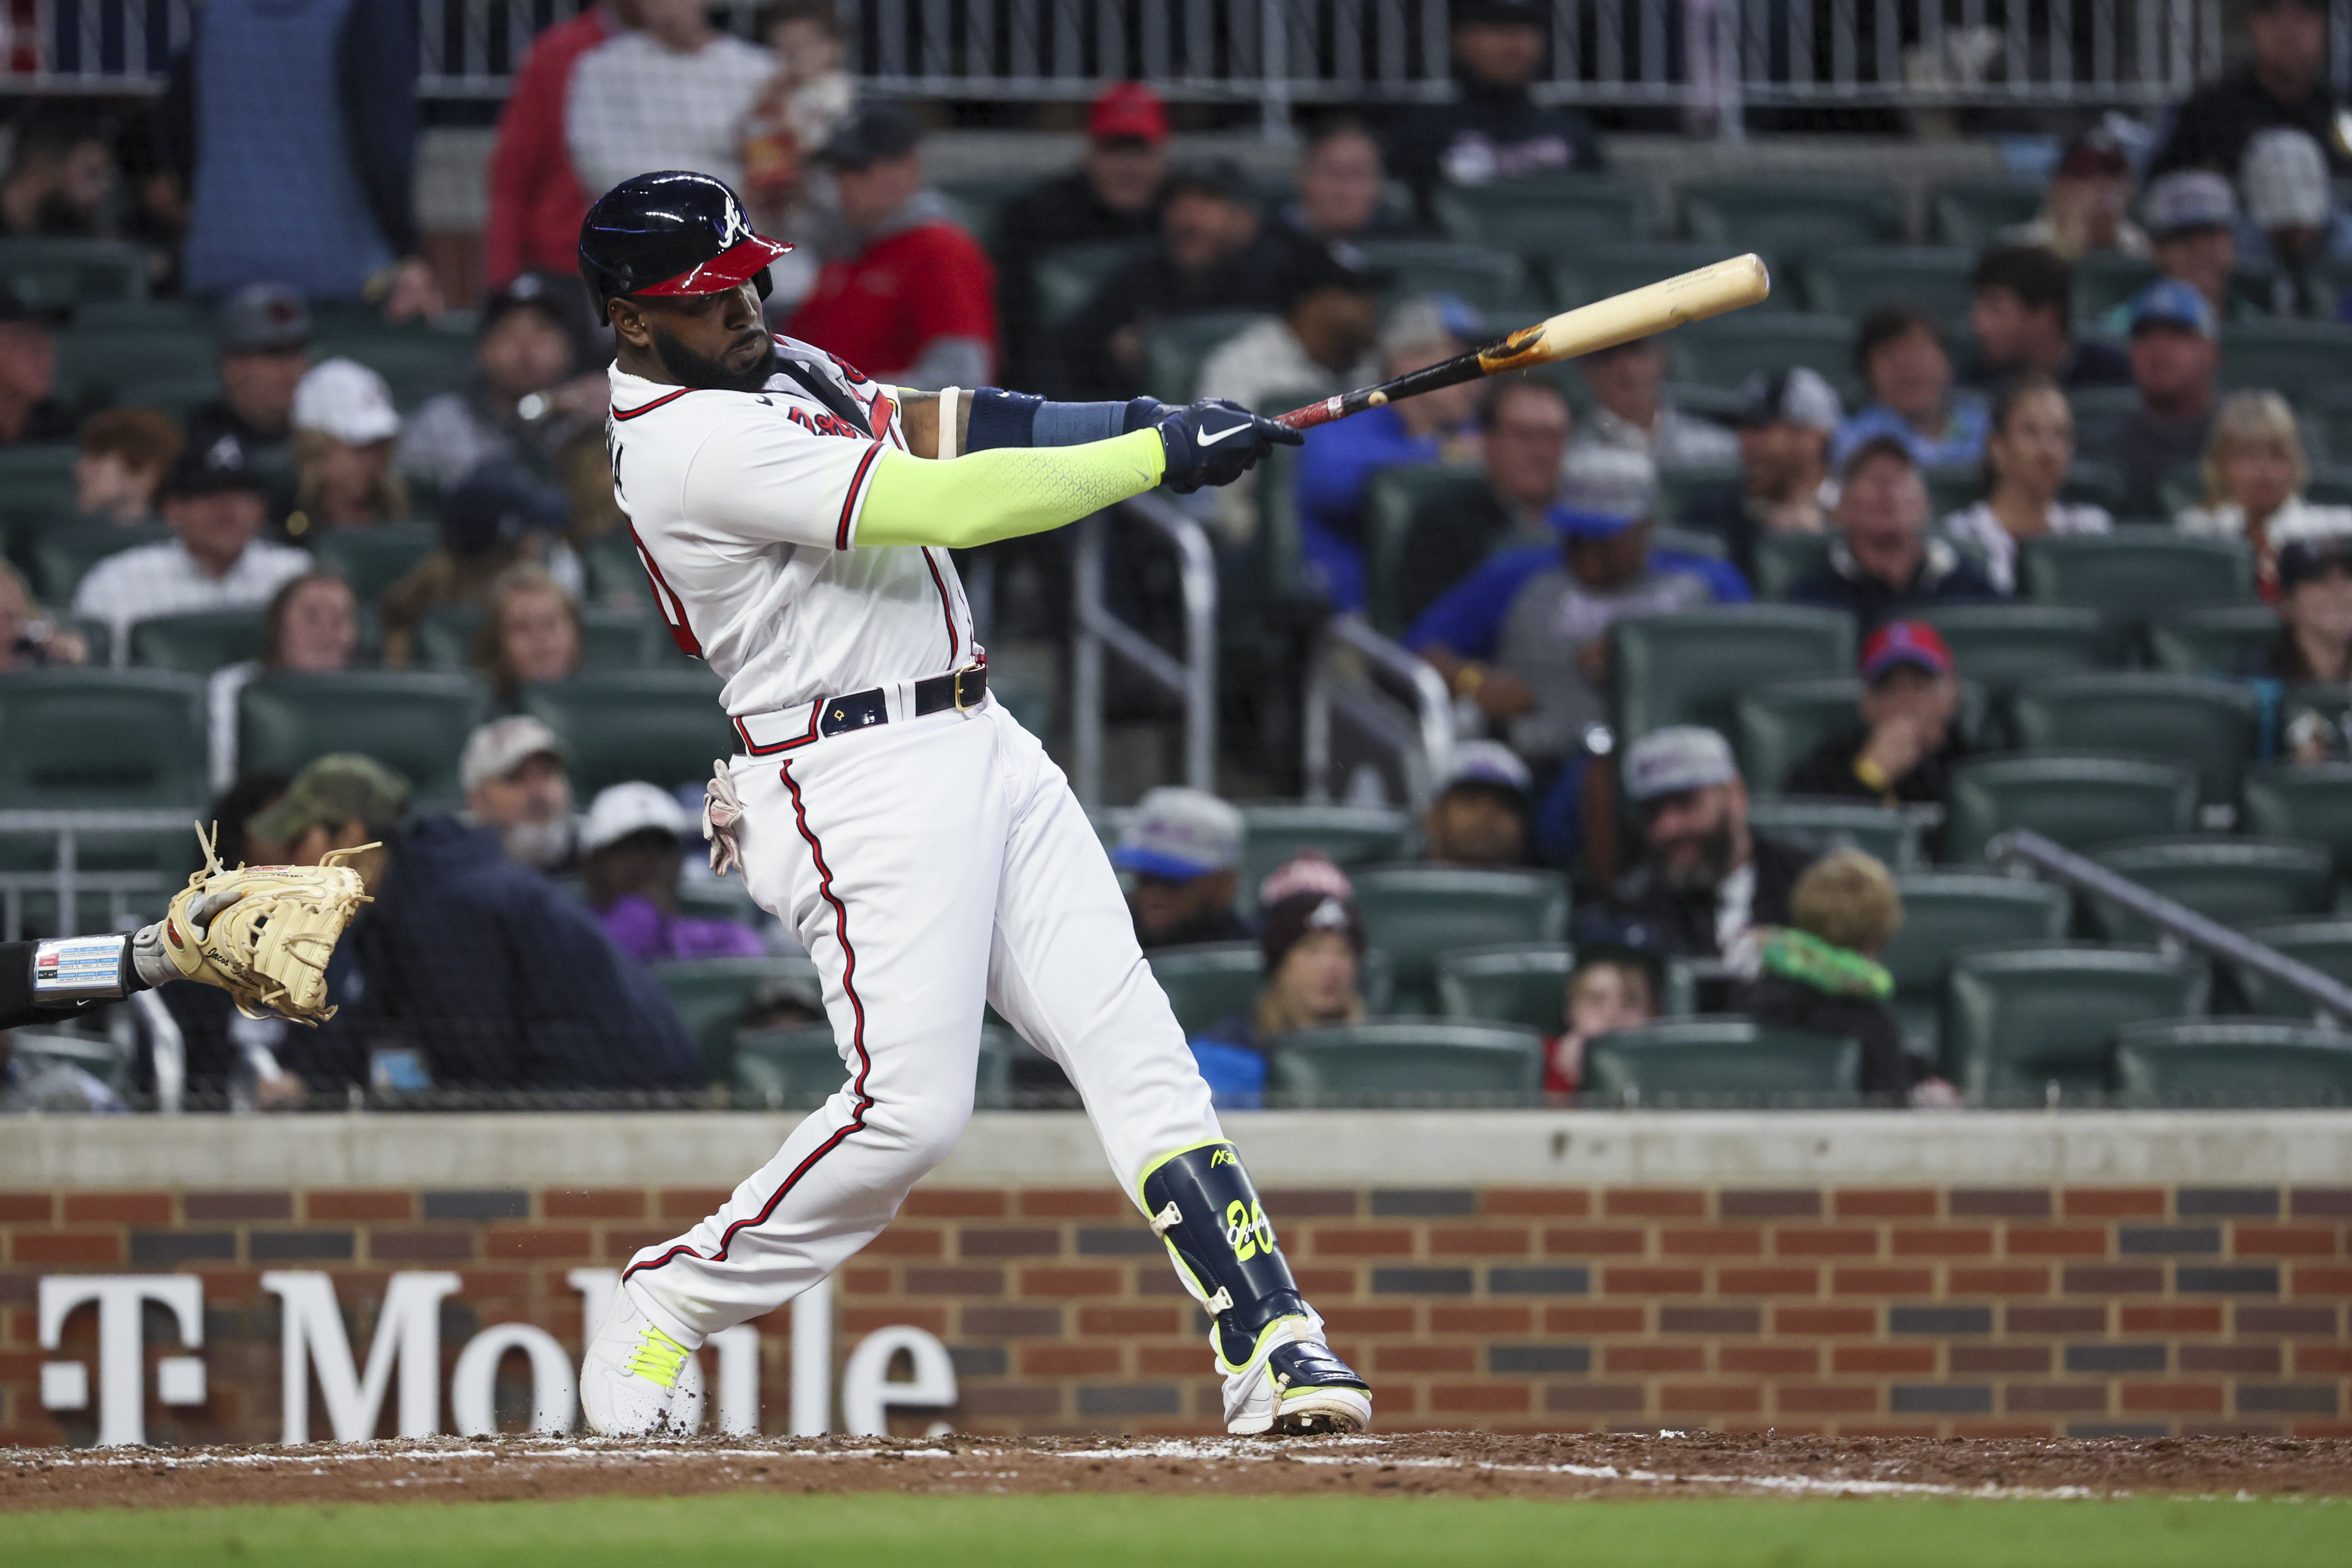 What is the cause of Marcell Ozuna's recent decline? - Battery Power